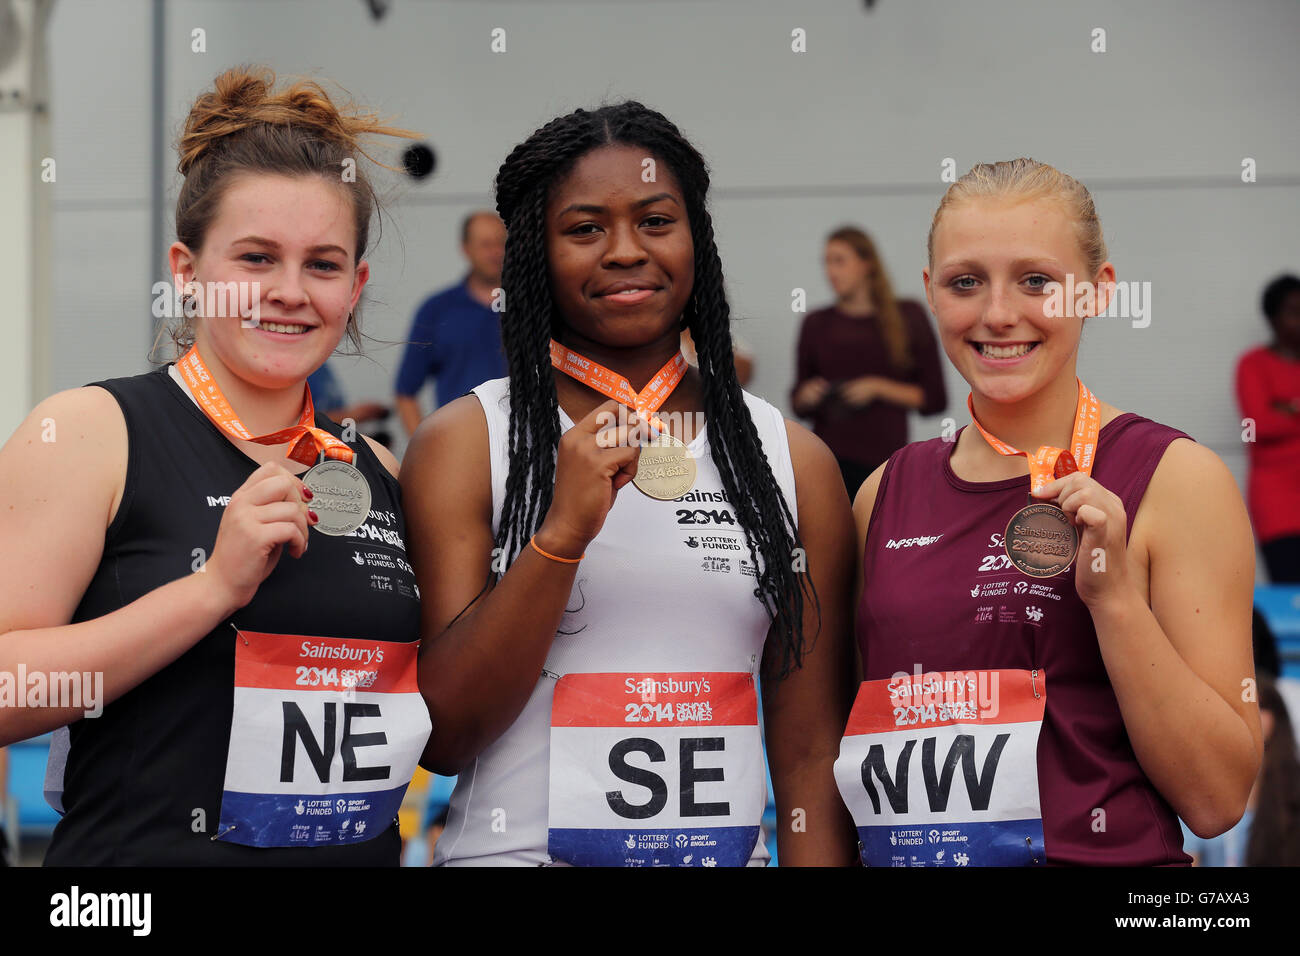 Medal ceremony for the Girls Shot Putt, Gold South East's Divine Oladipo, Silver North east's Toni Buckingham and Bronze North West's Emily Ball at the Sainsbury's 2014 School Games, Manchester Regional Arena, Manchester. Stock Photo